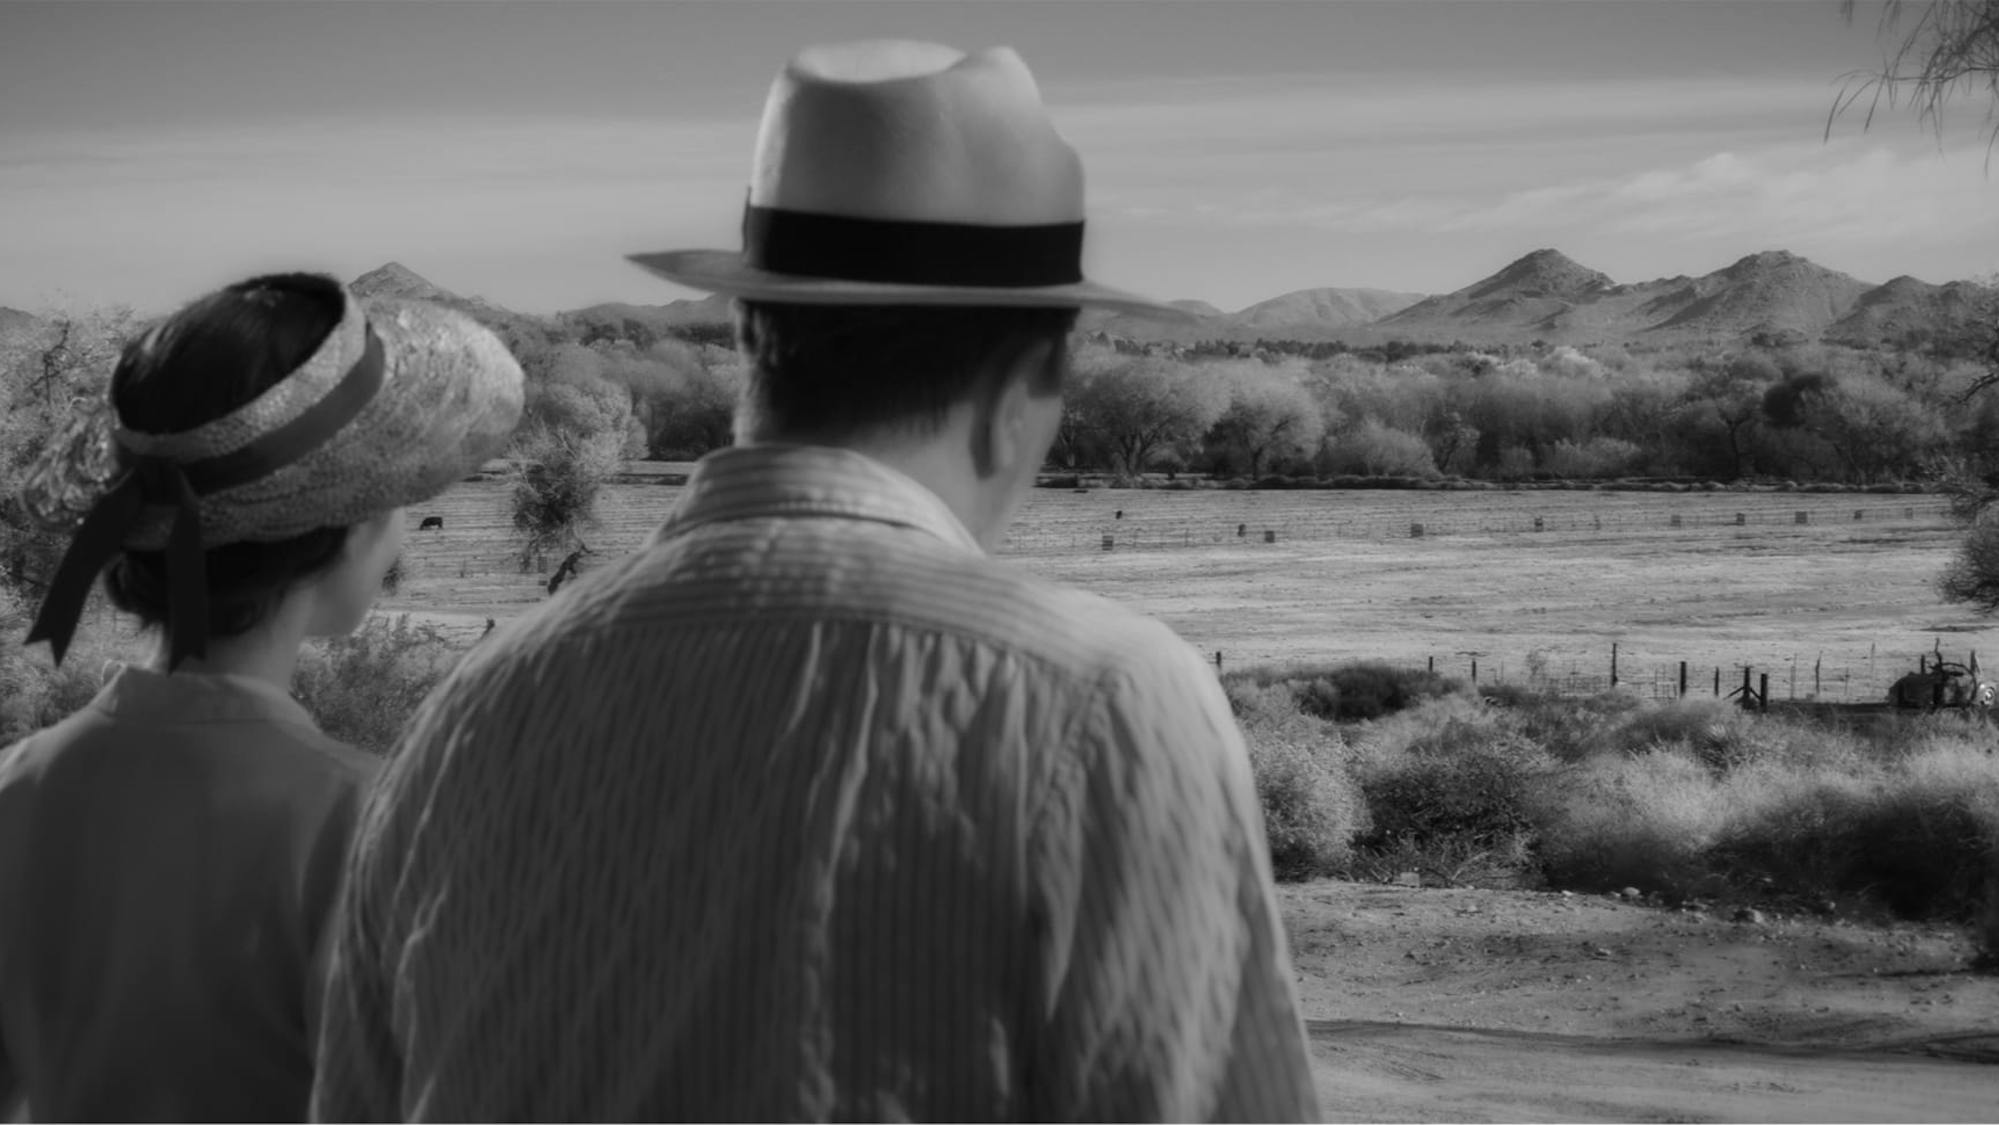 In a shot from the film, we see how the scene above translates to a black-and-white experience. The tones from Collins’s blouse and hat match the desert landscape in front of her. The textures of the drying foliage are soft.